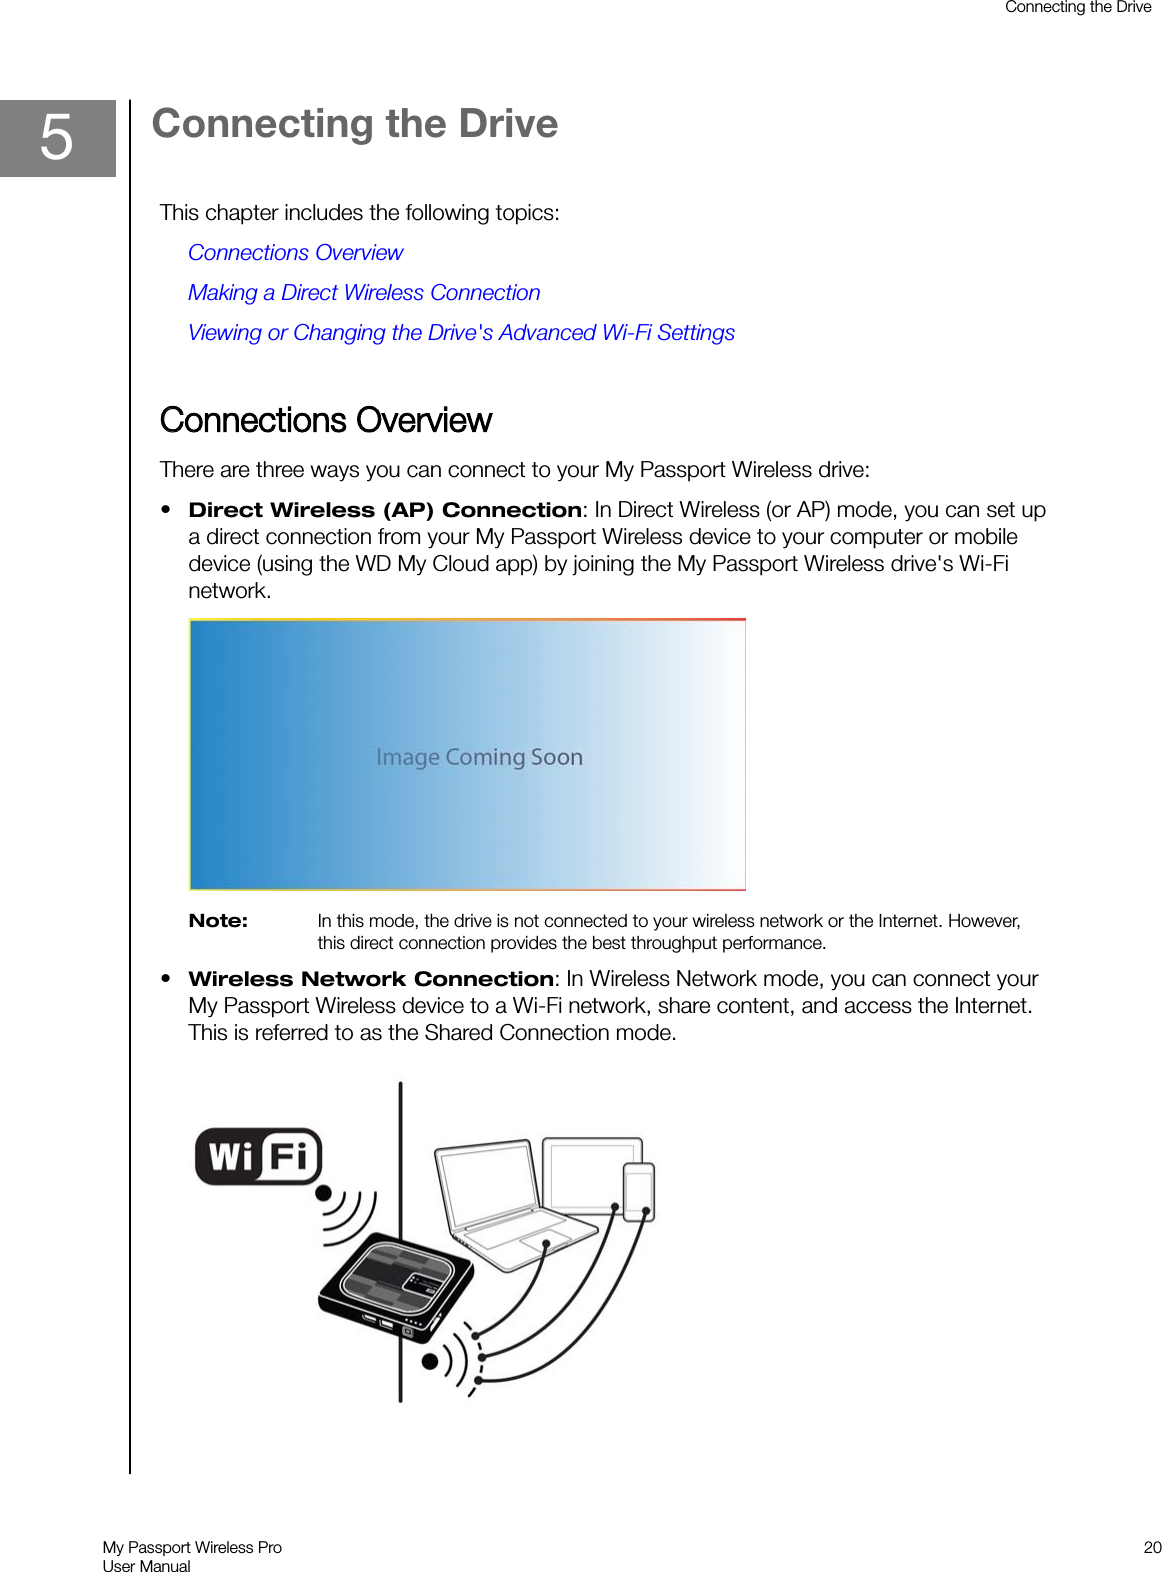 5Connecting the DriveThis chapter includes the following topics:Connections OverviewMaking a Direct Wireless ConnectionViewing or Changing the Drive&apos;s Advanced Wi-Fi SettingsCConnections OverviewThere are three ways you can connect to your My Passport Wireless drive:•Direct Wireless (AP) Connection: In Direct Wireless (or AP) mode, you can set upa direct connection from your My Passport Wireless device to your computer or mobiledevice (using the WD My Cloud app) by joining the My Passport Wireless drive&apos;s Wi-Finetwork.Note: In this mode, the drive is not connected to your wireless network or the Internet. However,this direct connection provides the best throughput performance.•Wireless Network Connection: In Wireless Network mode, you can connect yourMy Passport Wireless device to a Wi-Fi network, share content, and access the Internet.This is referred to as the Shared Connection mode.Connecting the DriveMy Passport Wireless ProUser Manual20